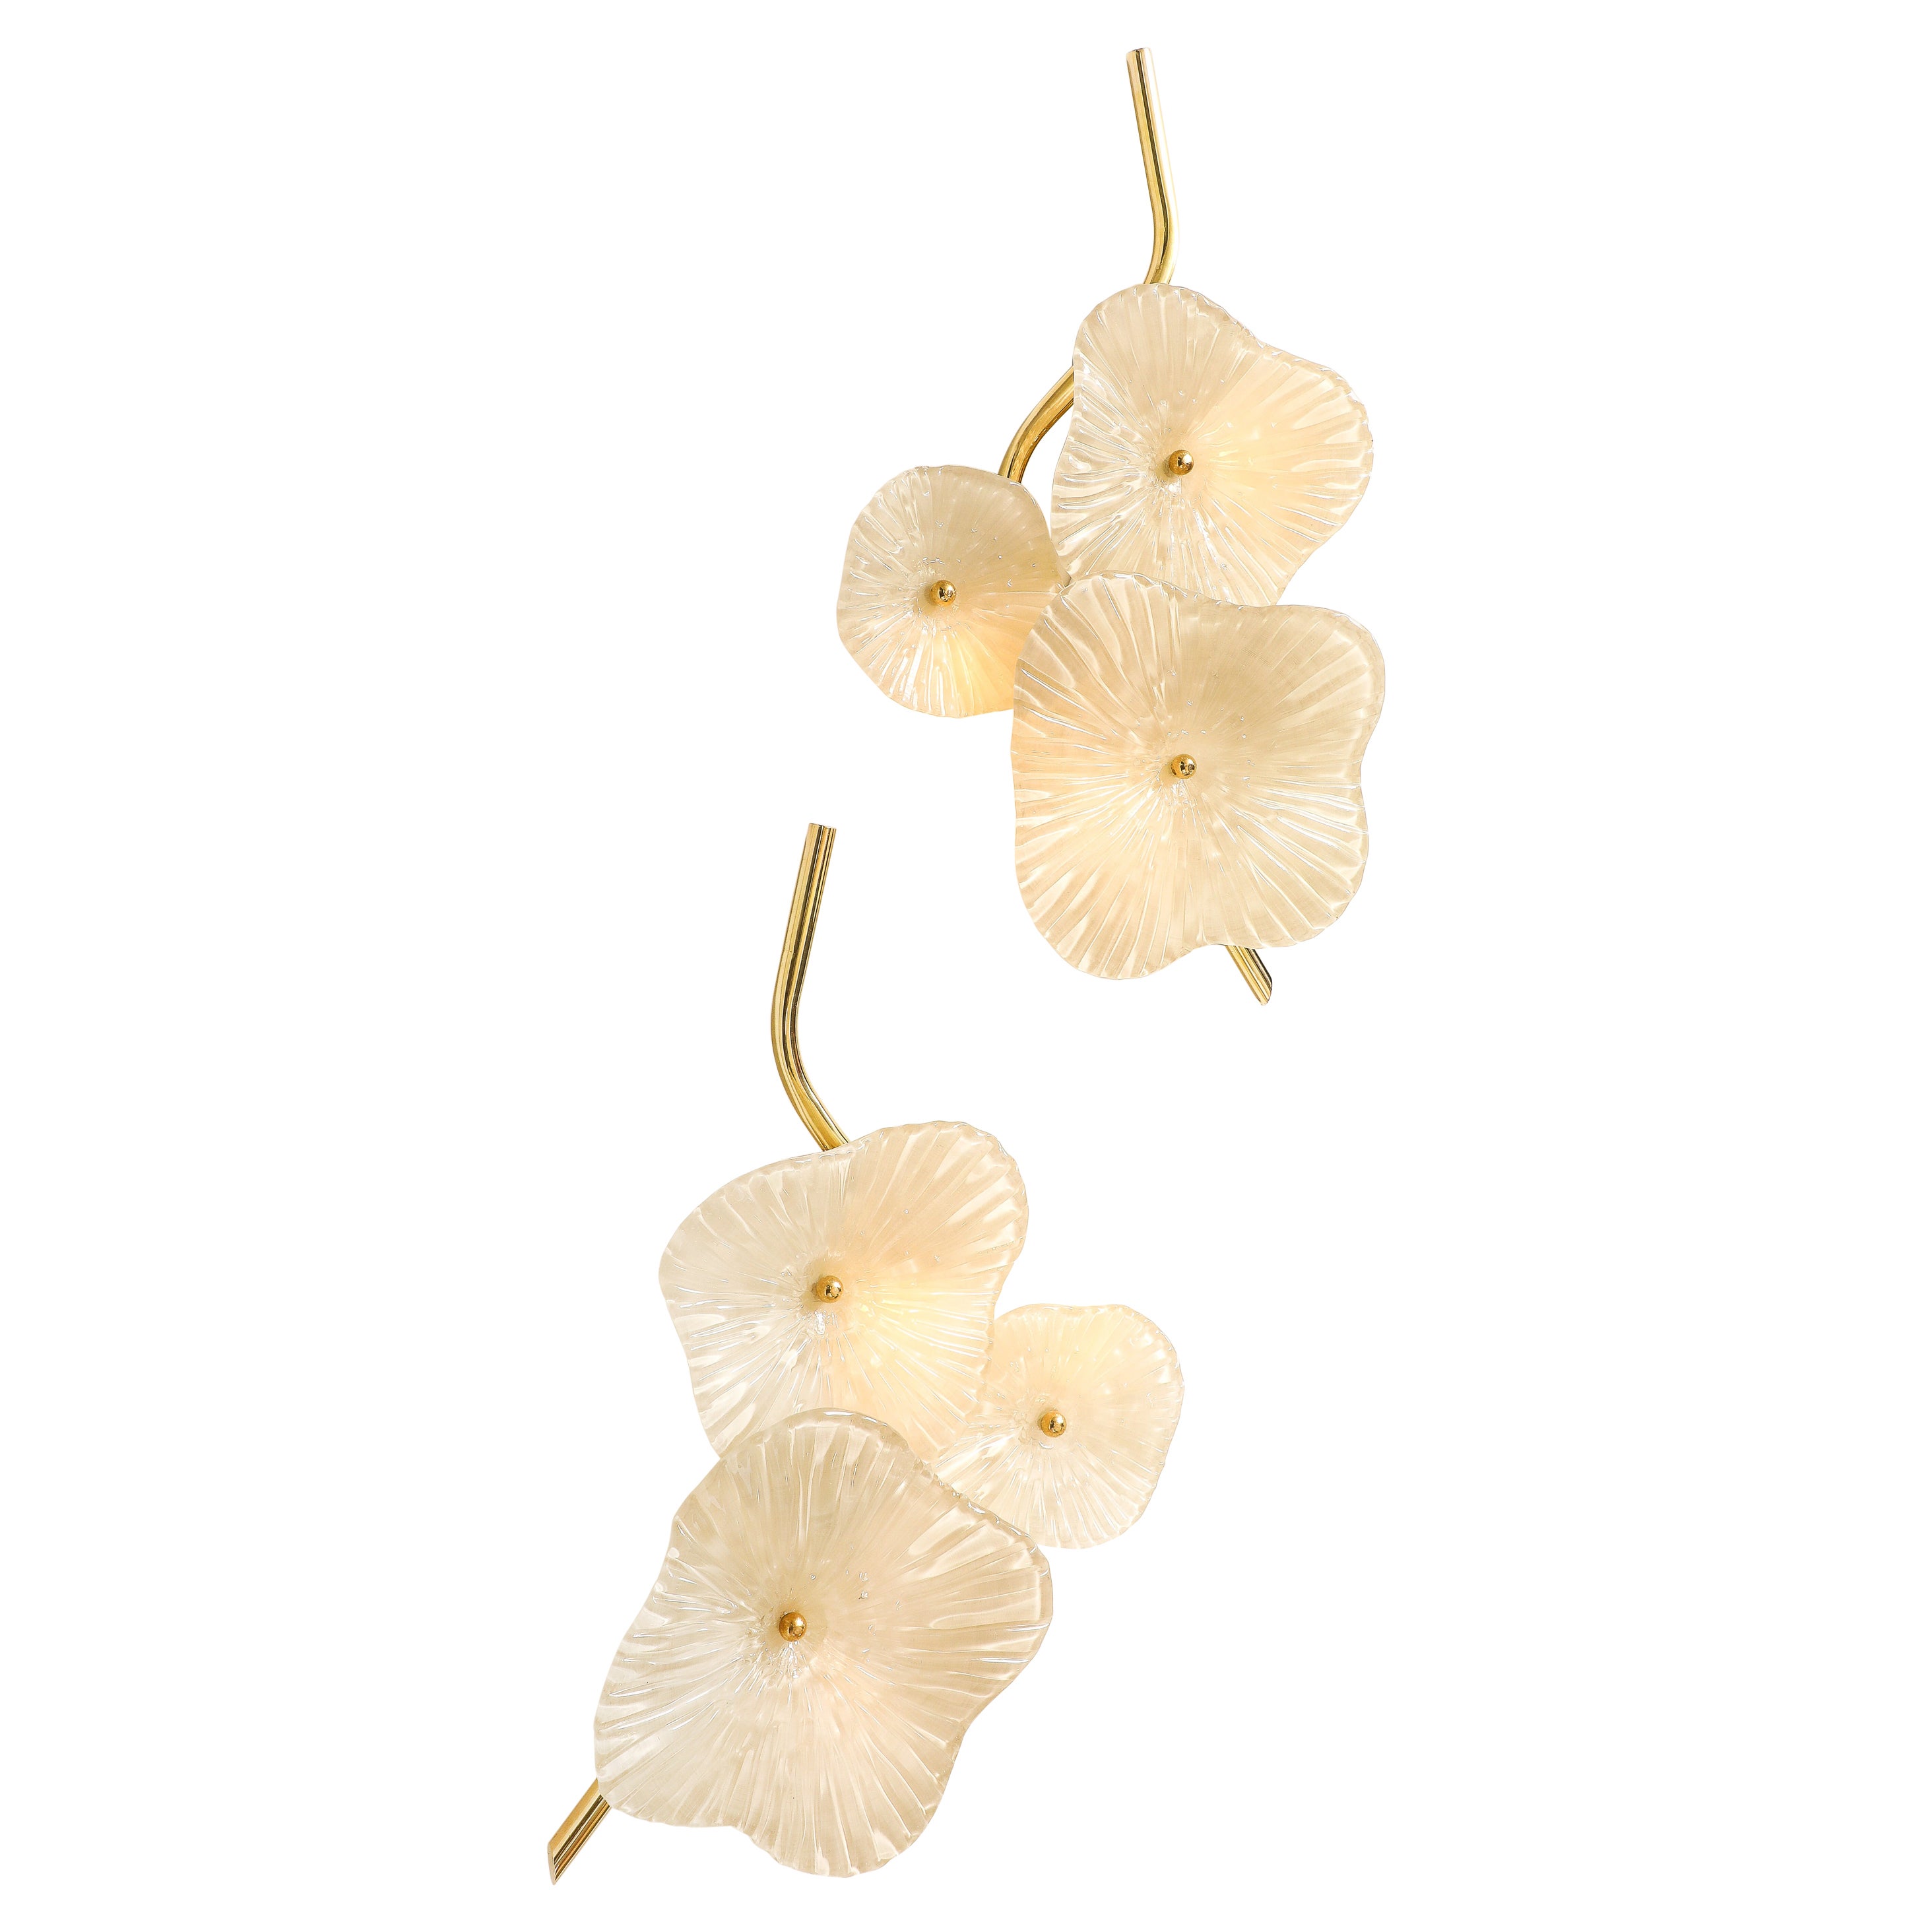  Pair of Ivory Murano "Flower" Glass and Brass Sconces, Italy For Sale